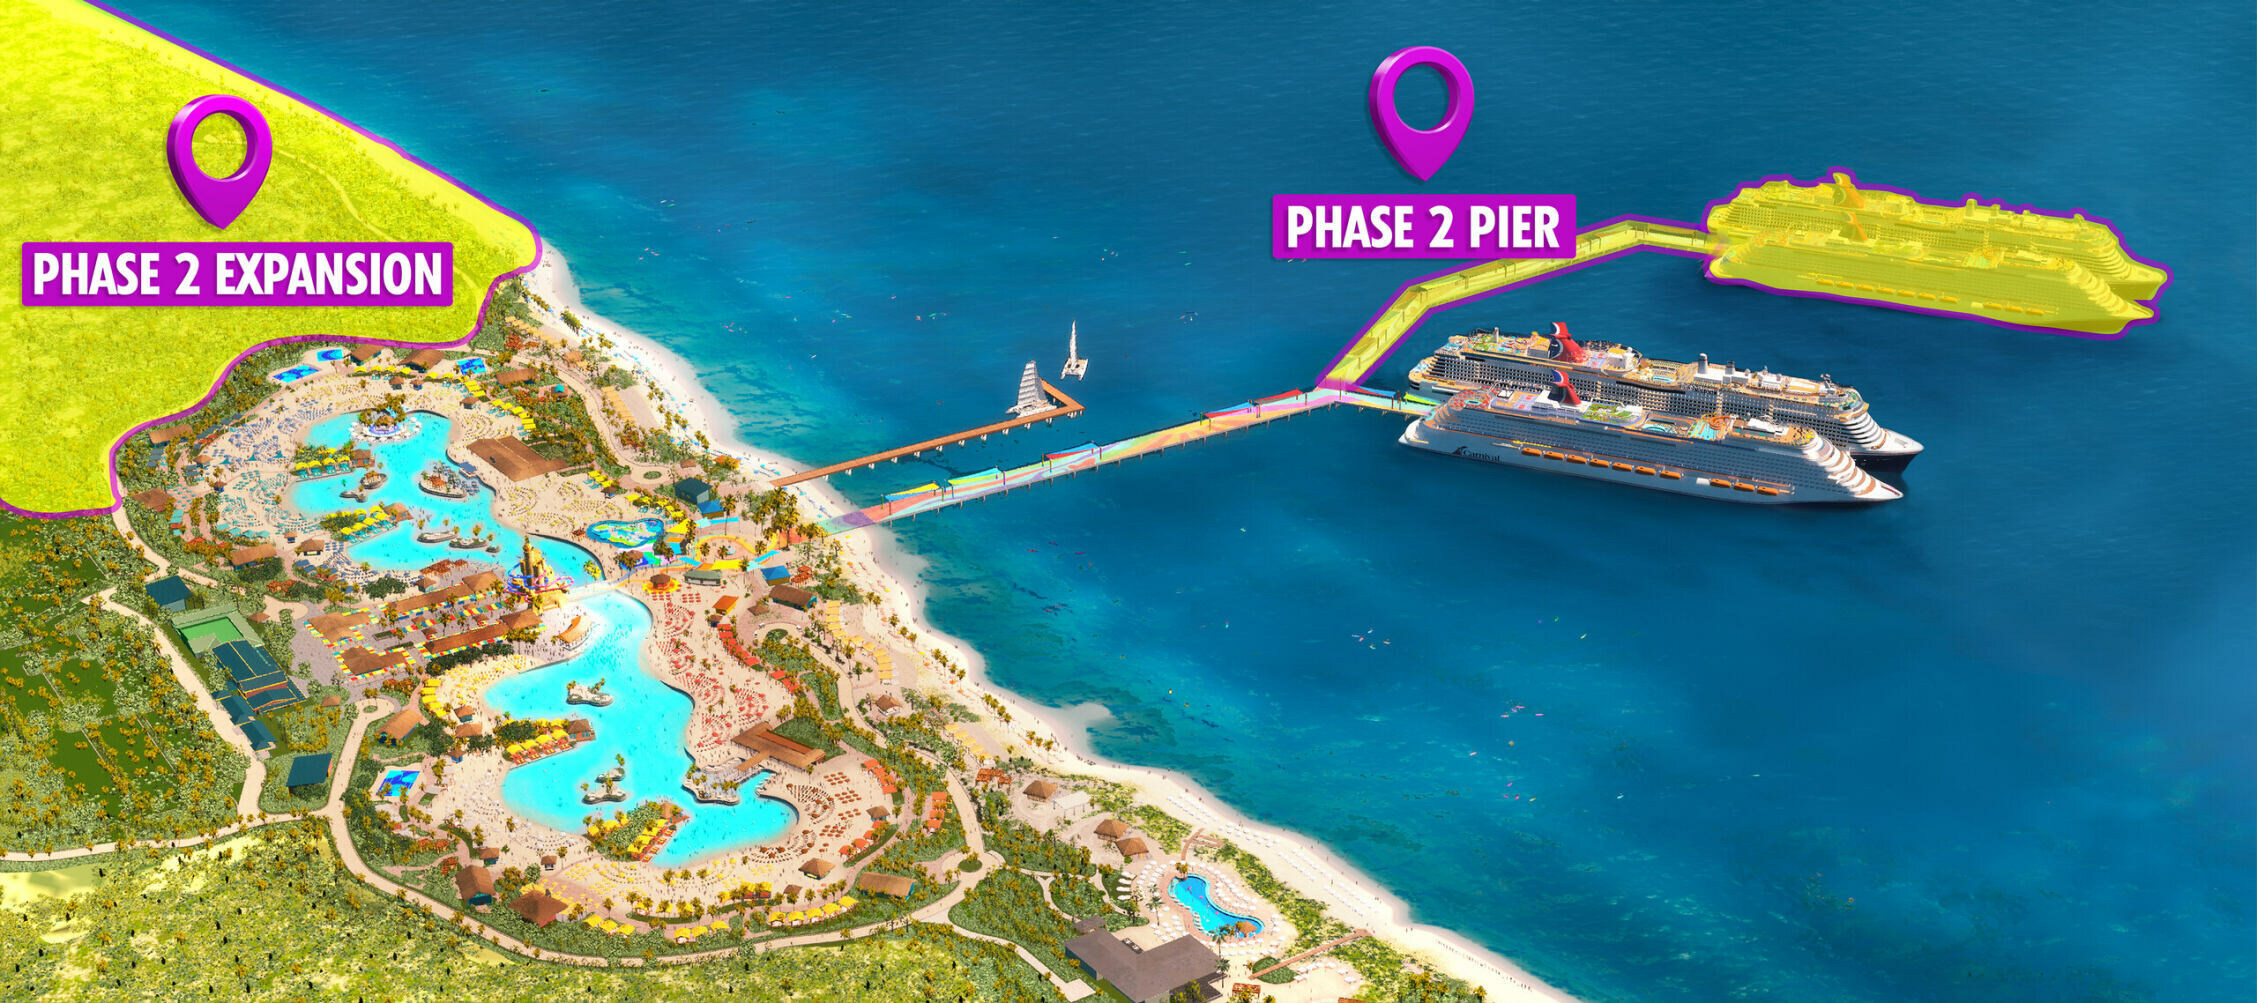 Carnival Corporation Announces New Pier Extension for Celebration Key in The Bahamas  (Image at LateCruiseNews.com - February 2024)